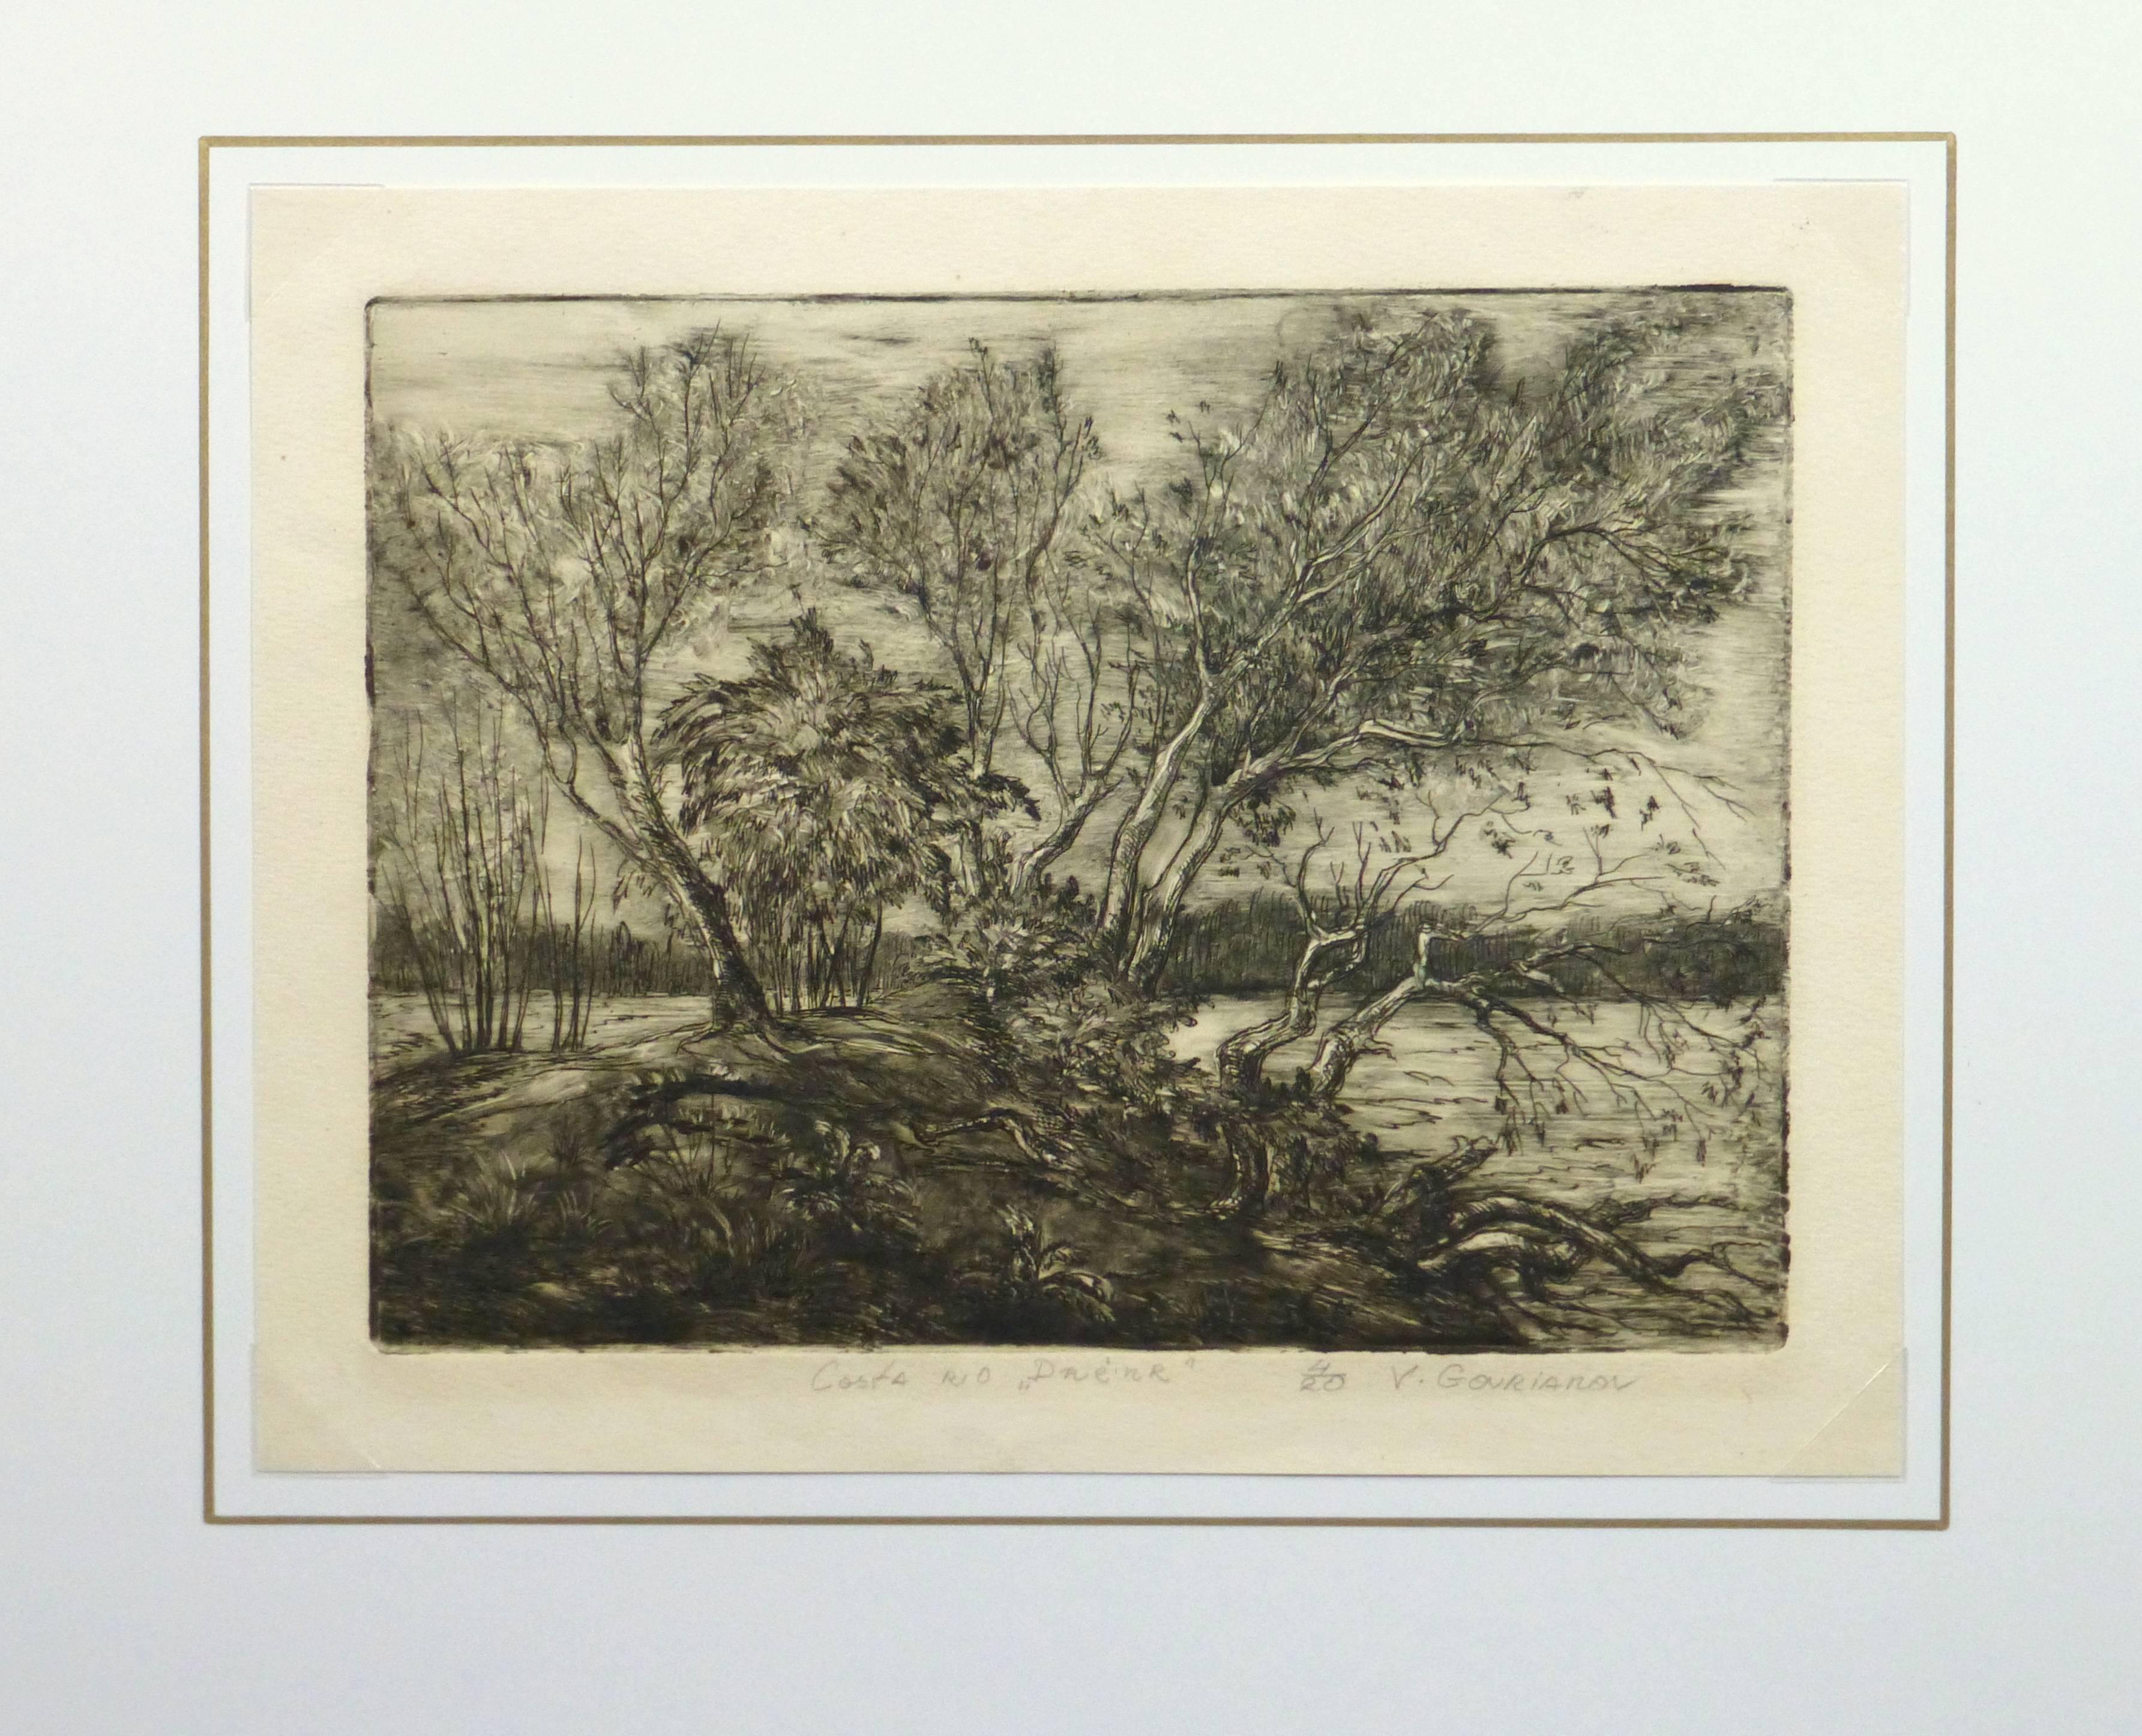 Vintage Etching - Curving Trees by the Riverside - Brown Landscape Print by V. Gourianov